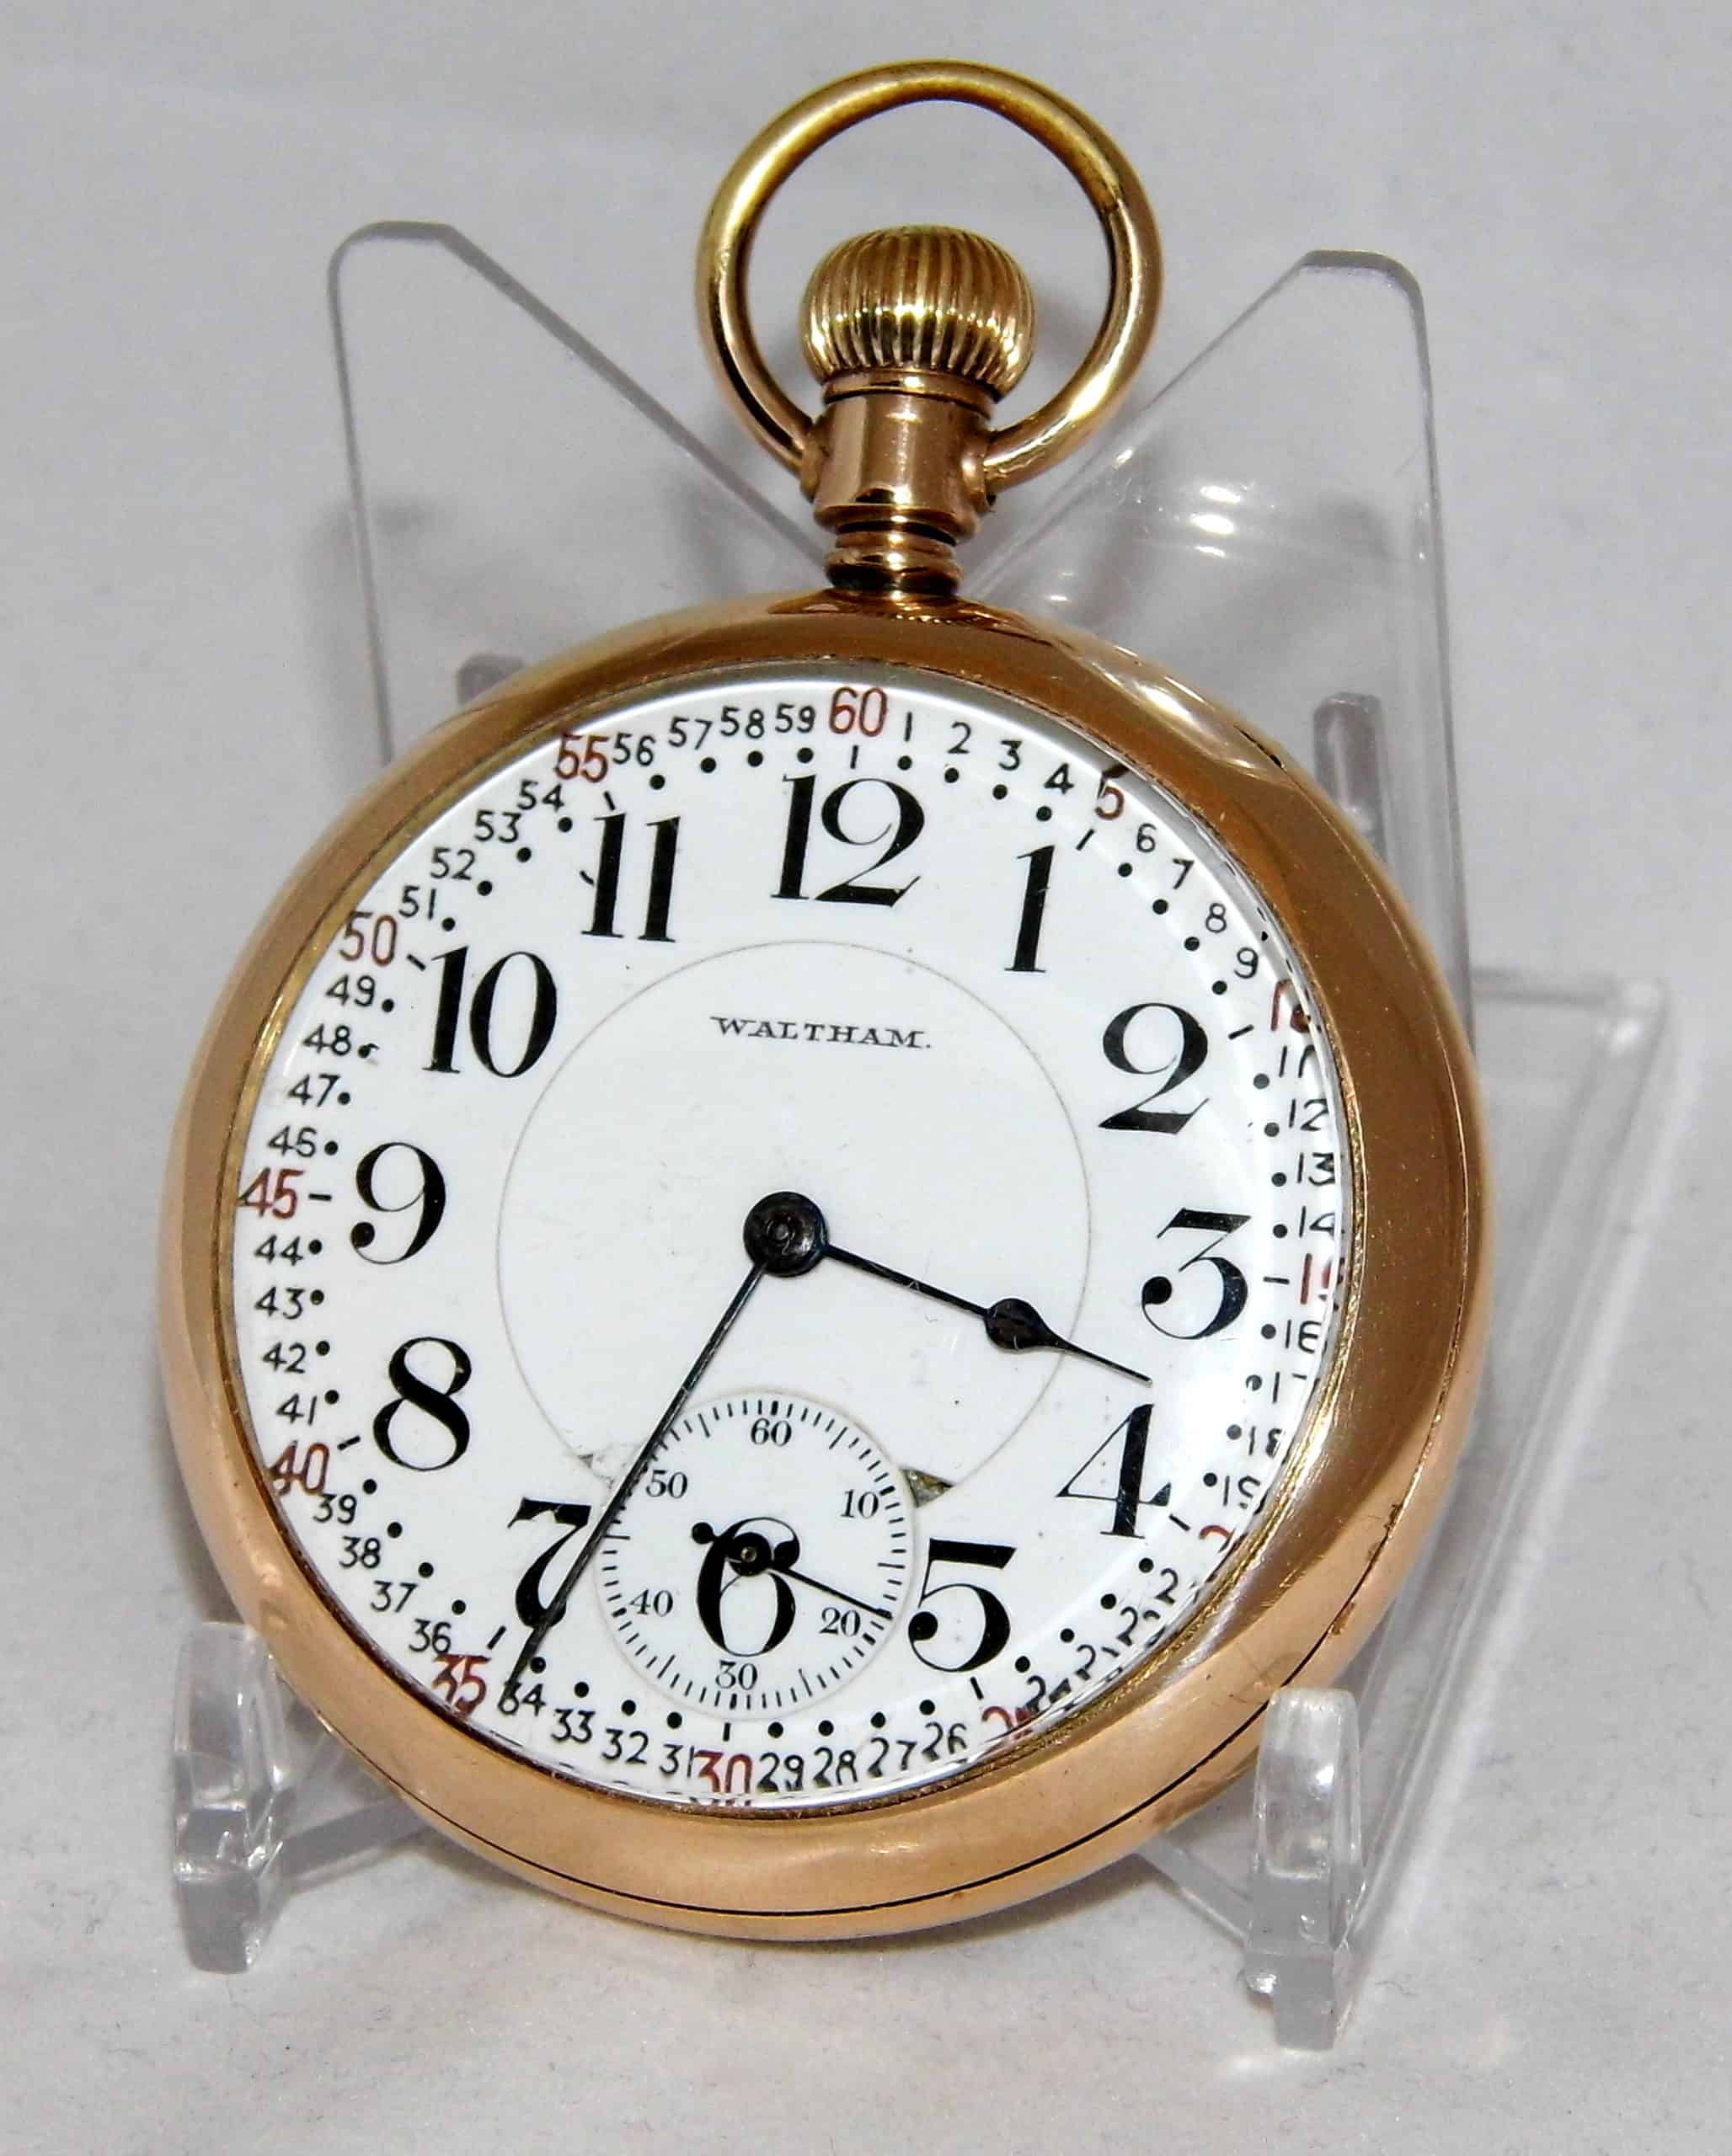 Antique Waltham pocket watch with up-and-down indicator